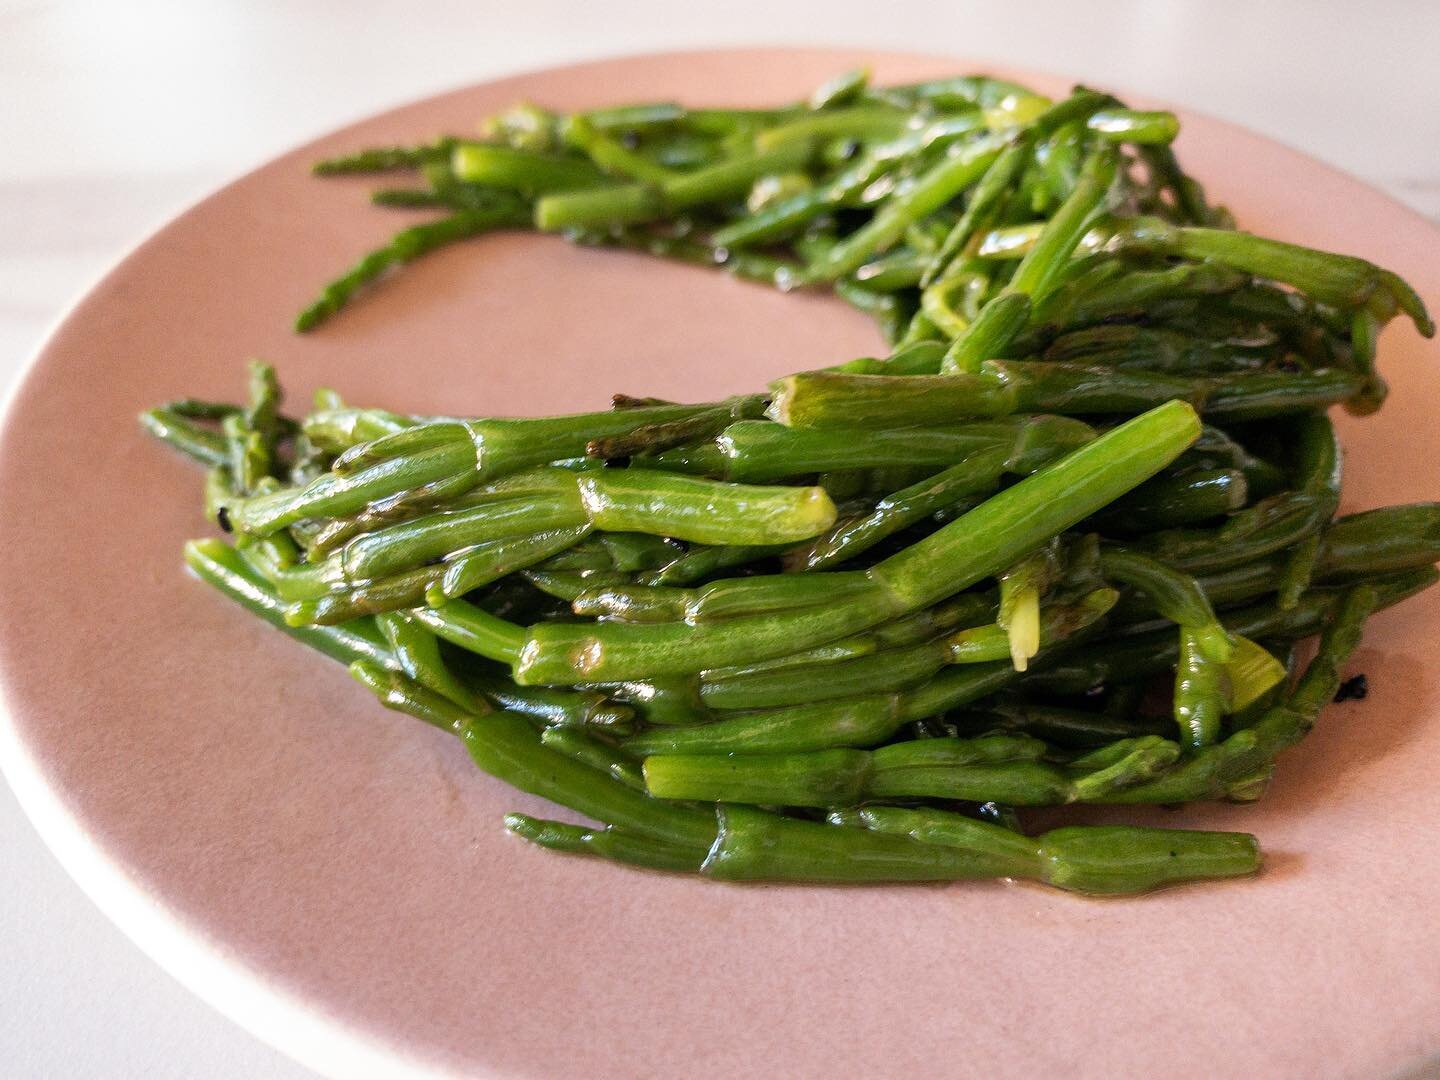 Korean Sea Asparagus, Banchan // Raw #sea #asparagus taste salty like the #ocean, and the young tips have a hint of unripped green apple peel. When boiled quickly, the flavor becomes more neutral, like a salted green bean.

This #banchan, a #Korean s